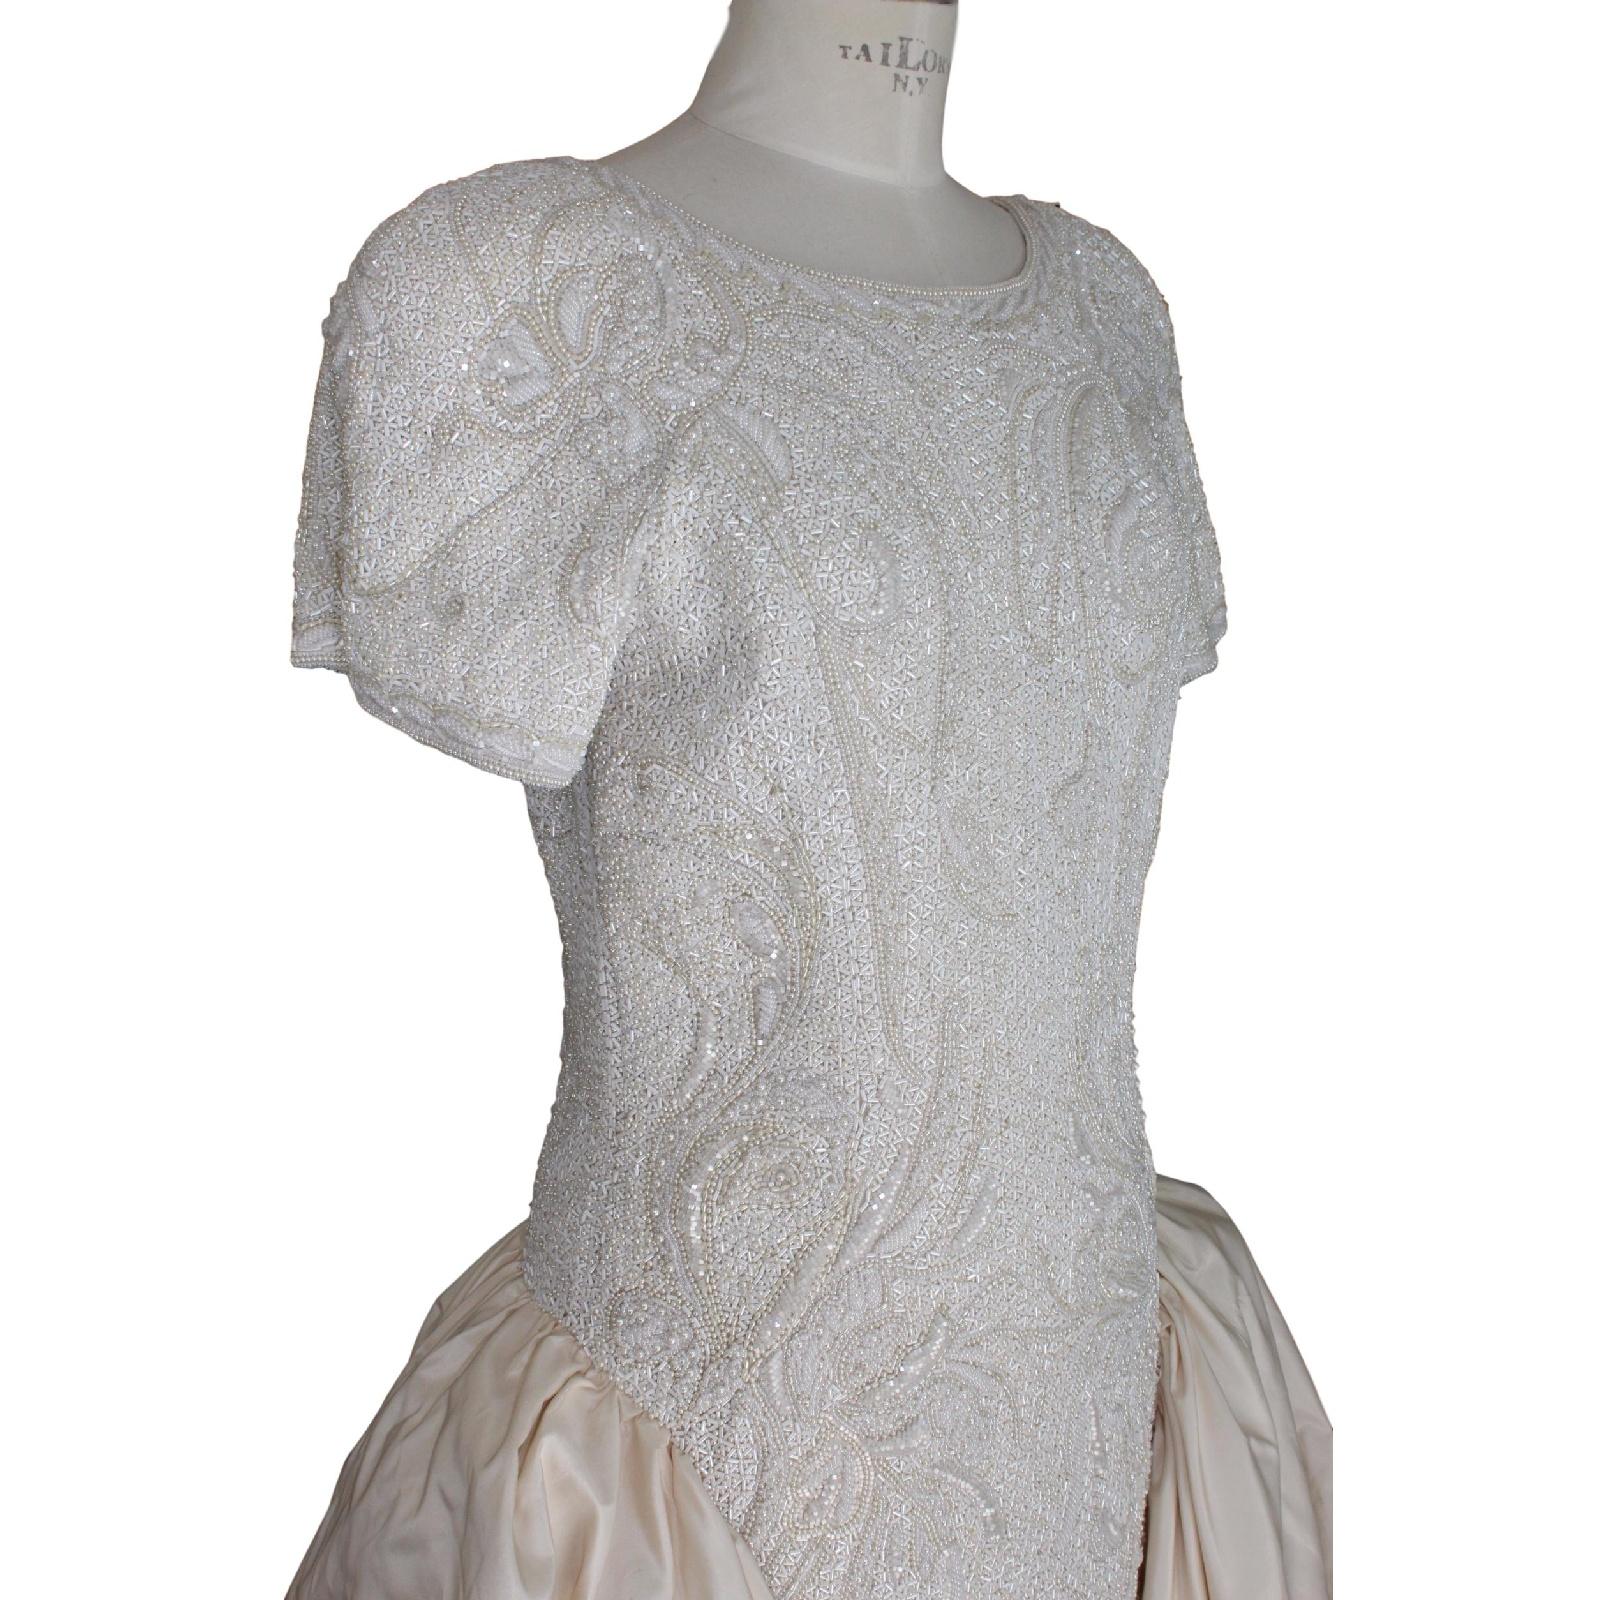 Women's Wedding Dress Cailan'd Ivory Silk Pearl and Sequins Pompous Italian 1980s